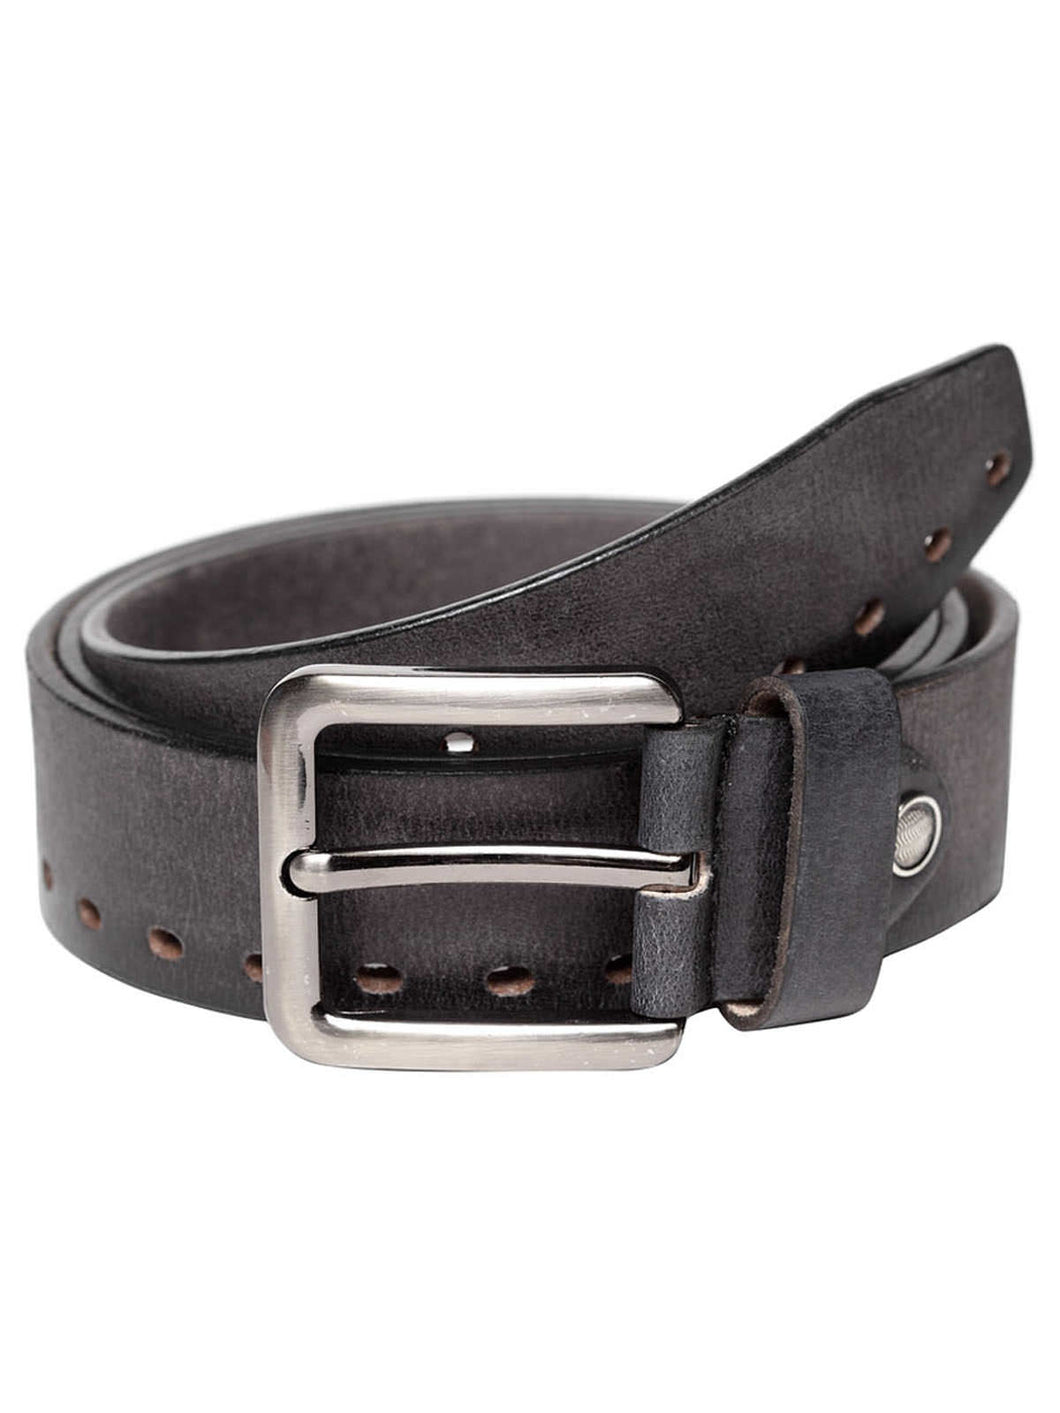 Teakwood Genuine Leather Black Solid Belt with Cut-Outs